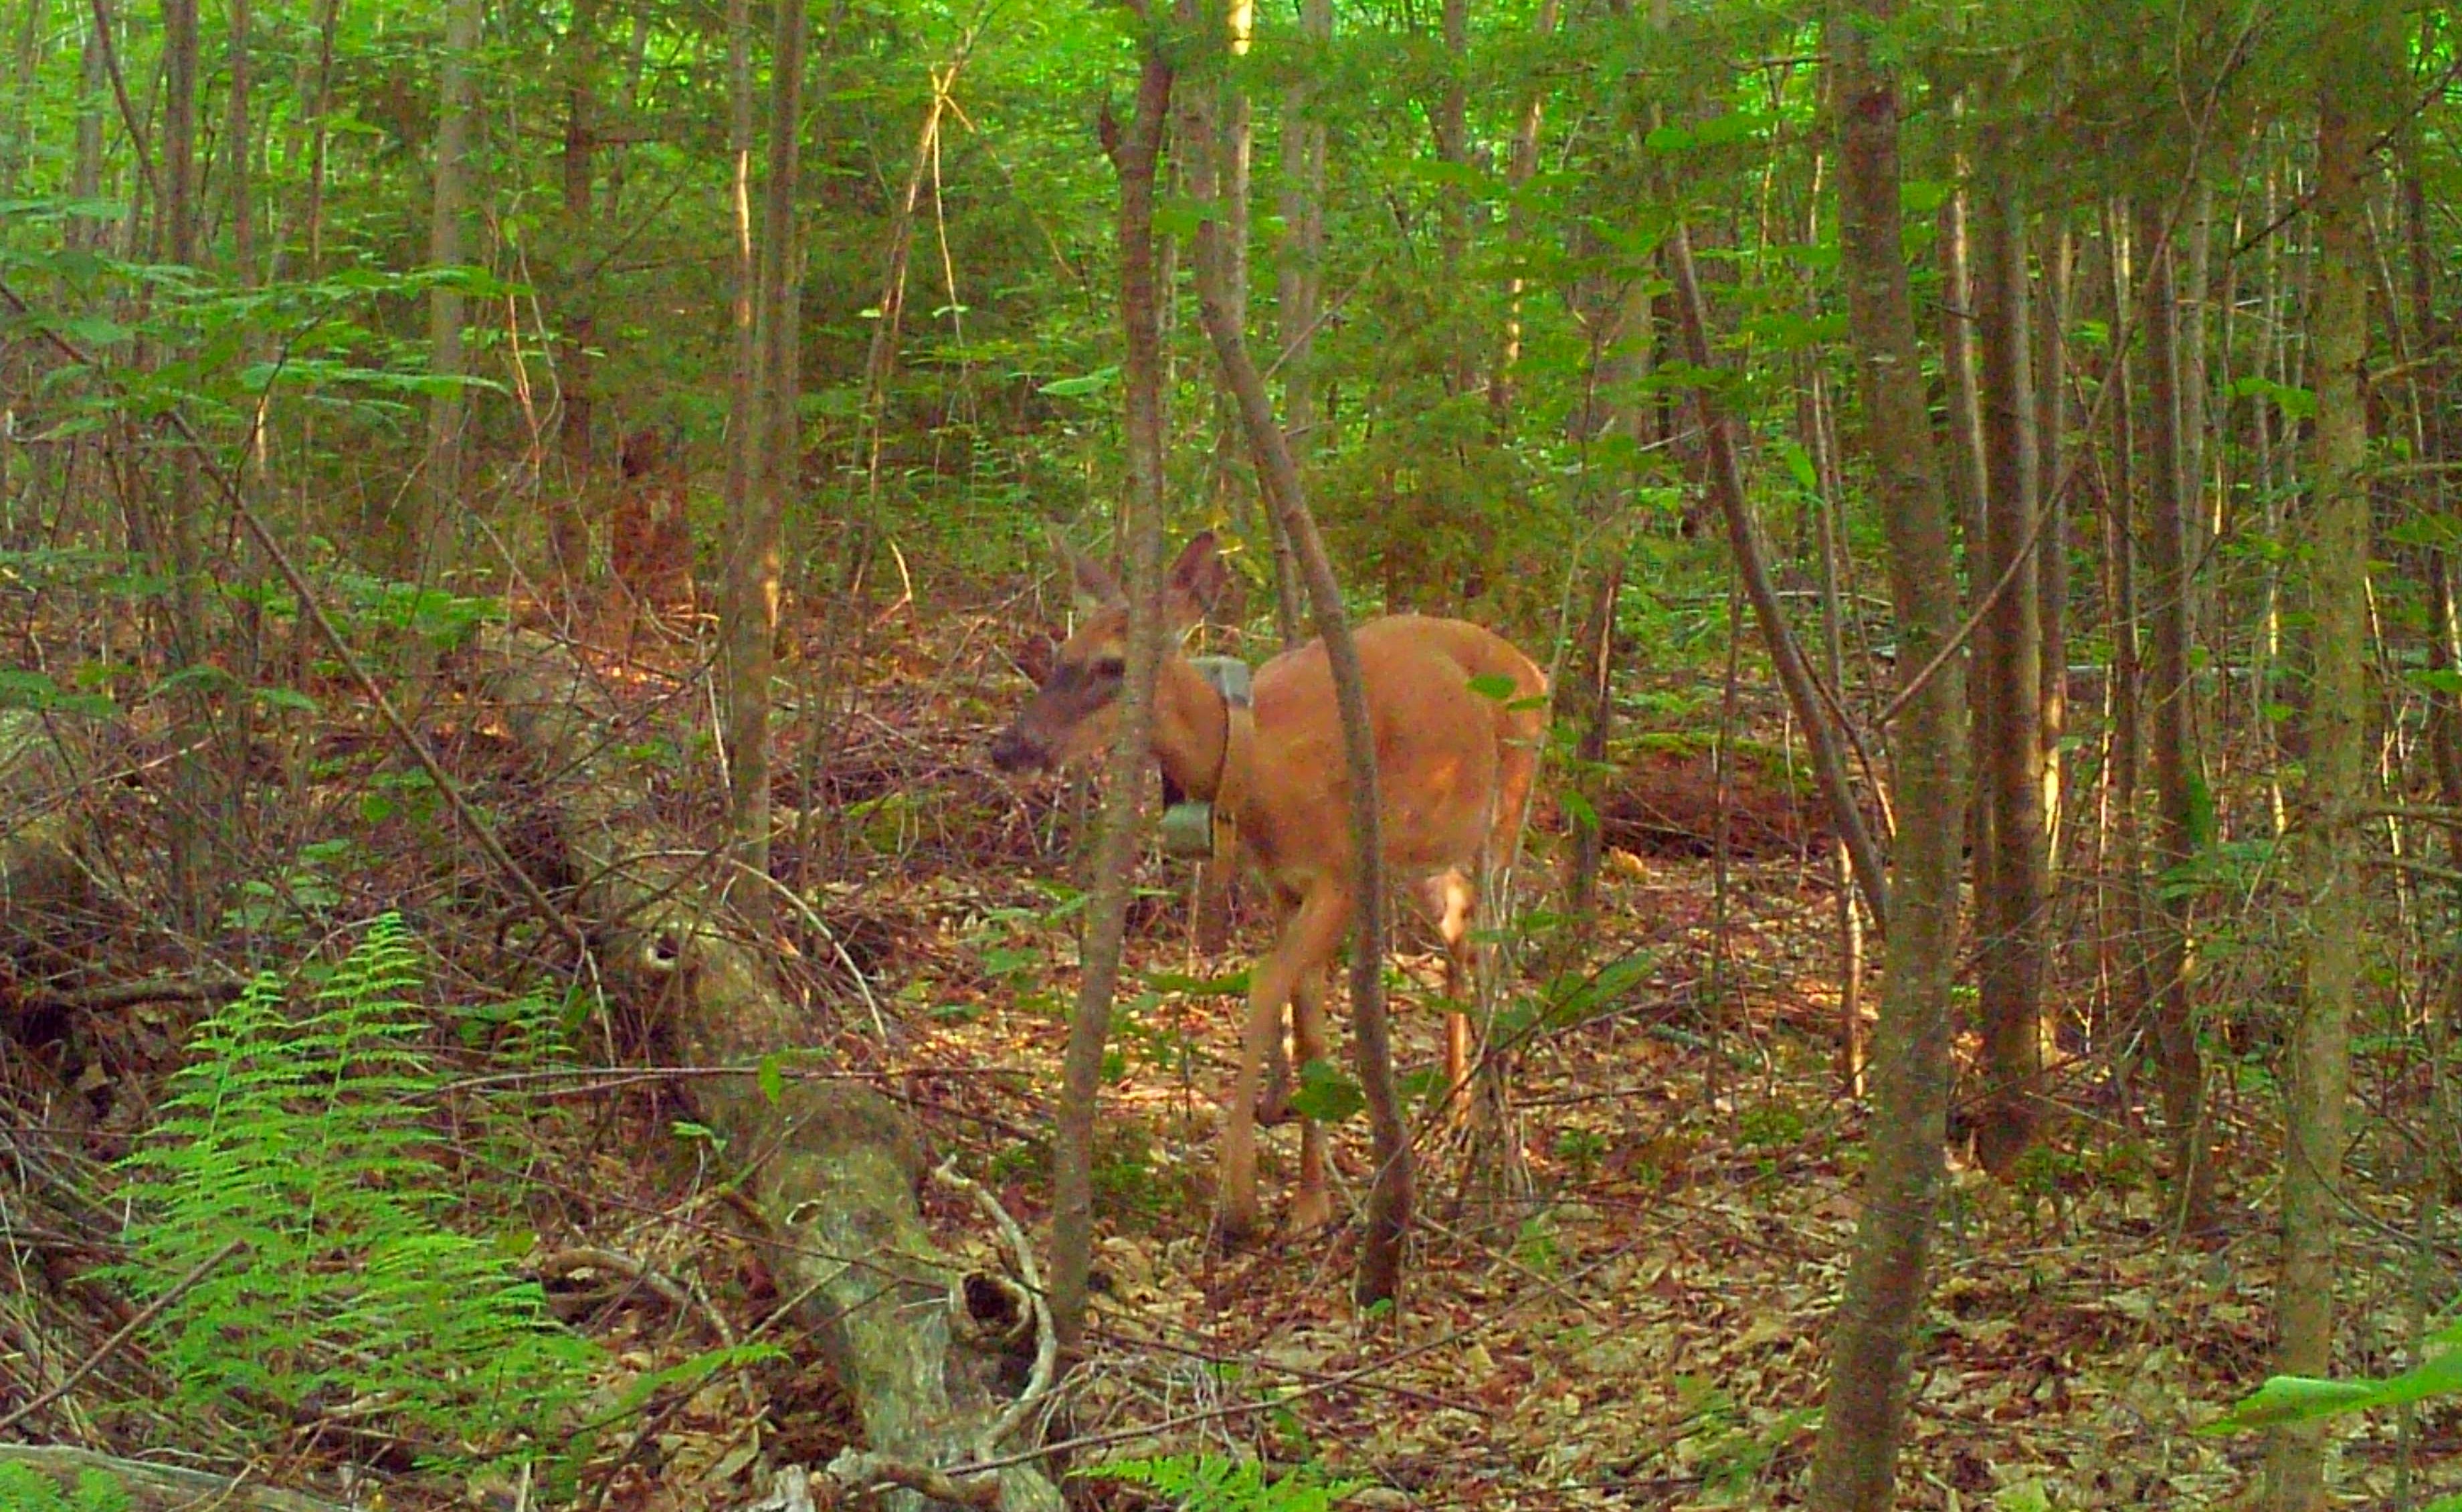 collared doe walking through forest in June